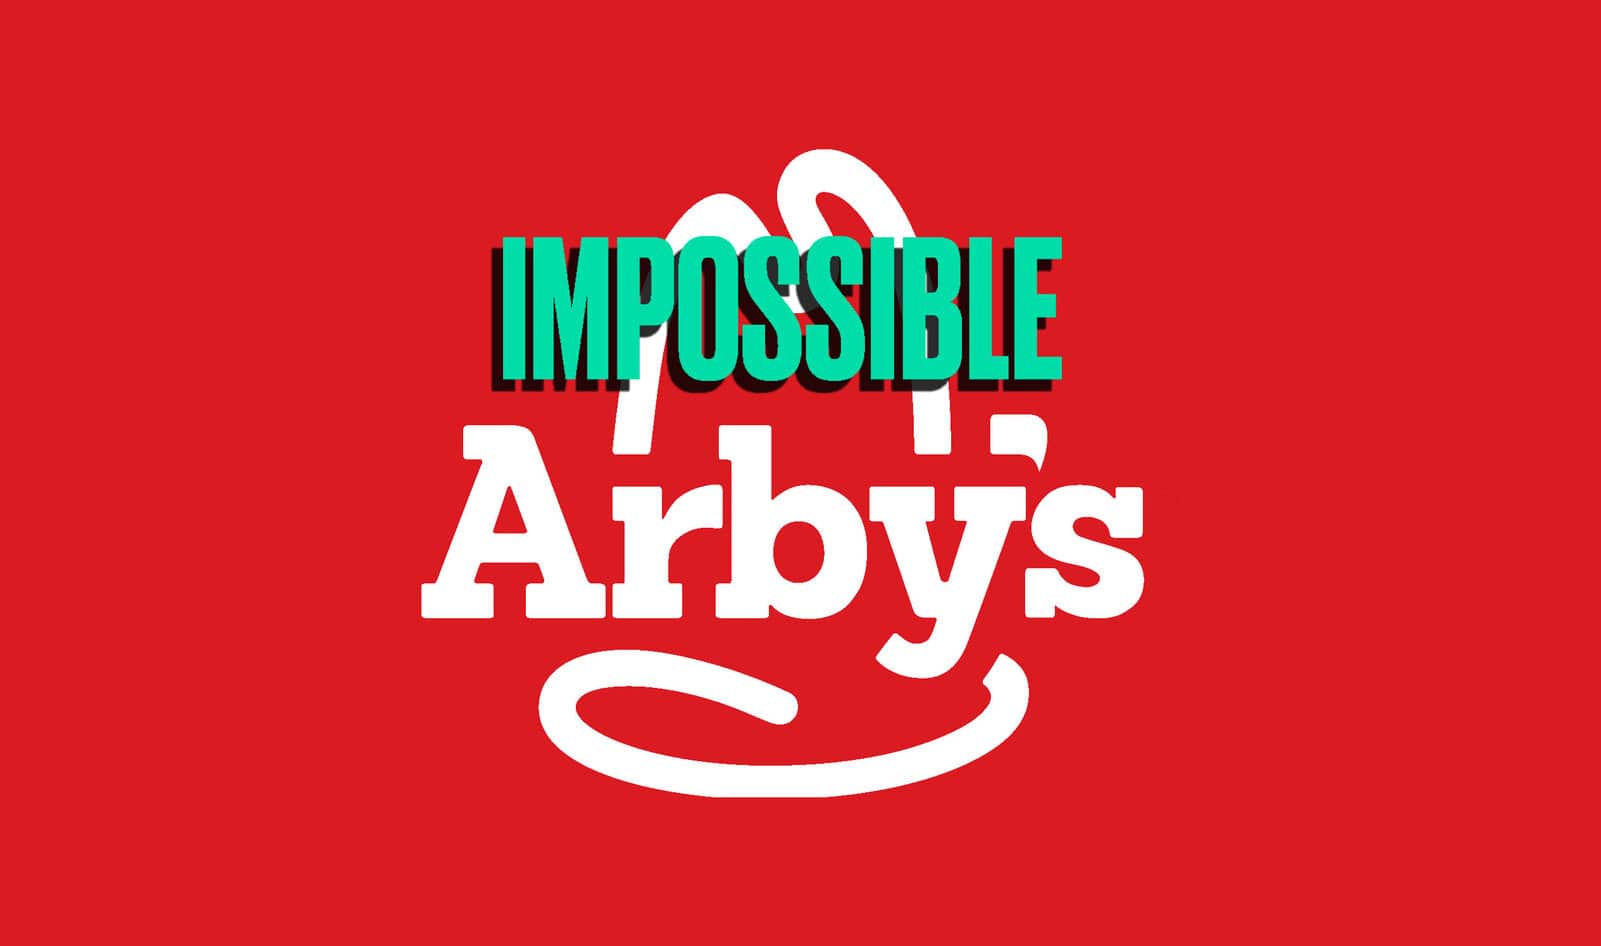 Arby’s Looks to Add Plant-Based Impossible Meat to Menu